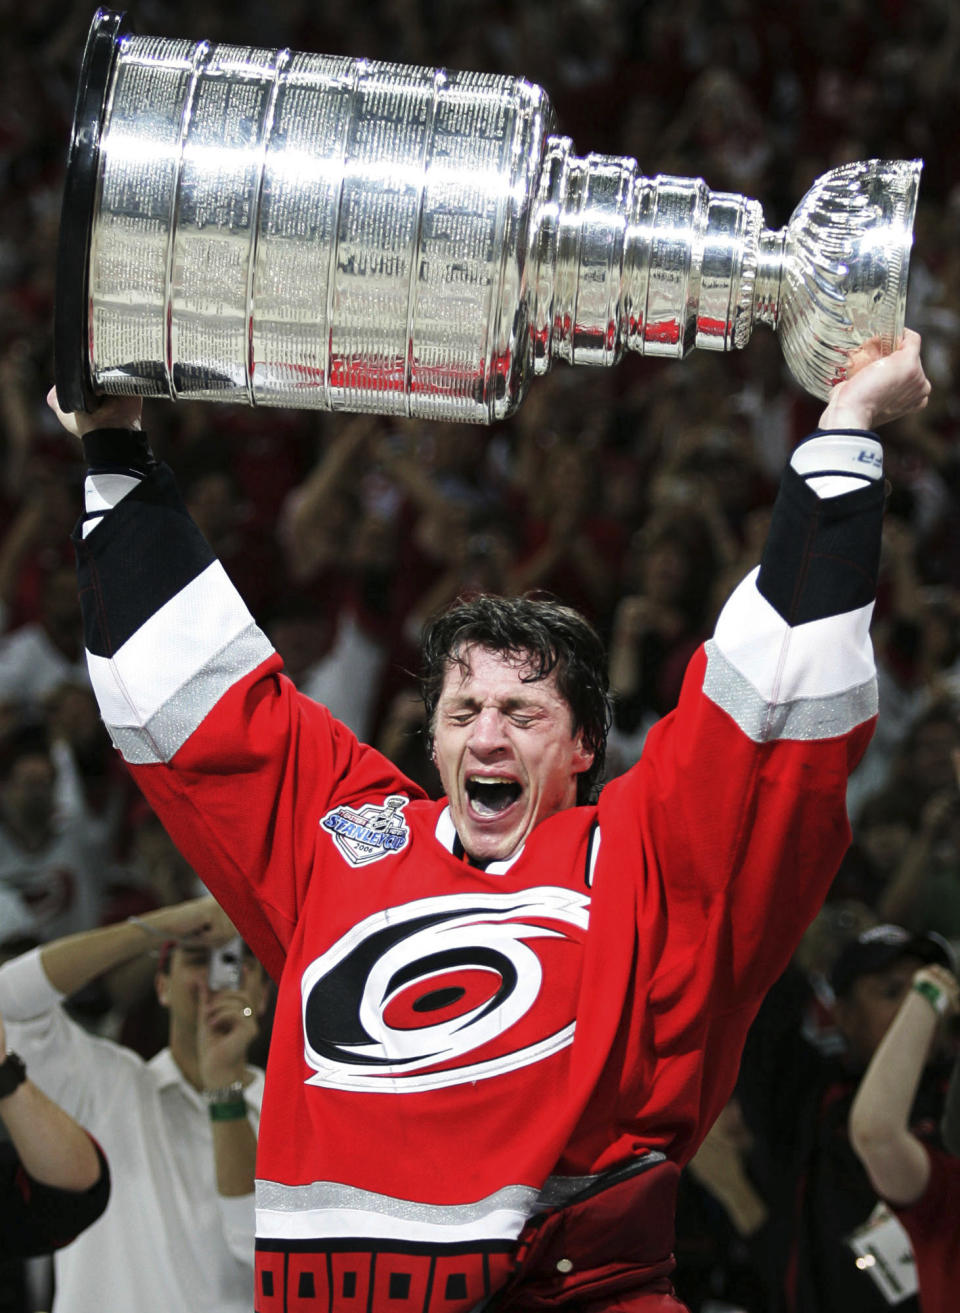 FILE - Carolina Hurricanes captain Rod Brind'Amour celebrates with the Stanley Cup after winning Game 7 of the Stanley Cup Finals over the Edmonton Oilers, in Raleigh, N.C., June 19, 2006. The 53-year-old Brind’Amour makes a habit of praising everyone around him when asked about the team's success, from players — including a core that has grown together through his tenure — to assistant coaches and support staff. Yet even as the captain of the Hurricanes’ 2006 Cup winner points elsewhere, there’s no minimizing Brind’Amour’s role in helping Carolina climb out of the wreckage of nine straight years without a single playoff game to become a perennial contender. (AP Photo/Ryan Remiorz, CP)